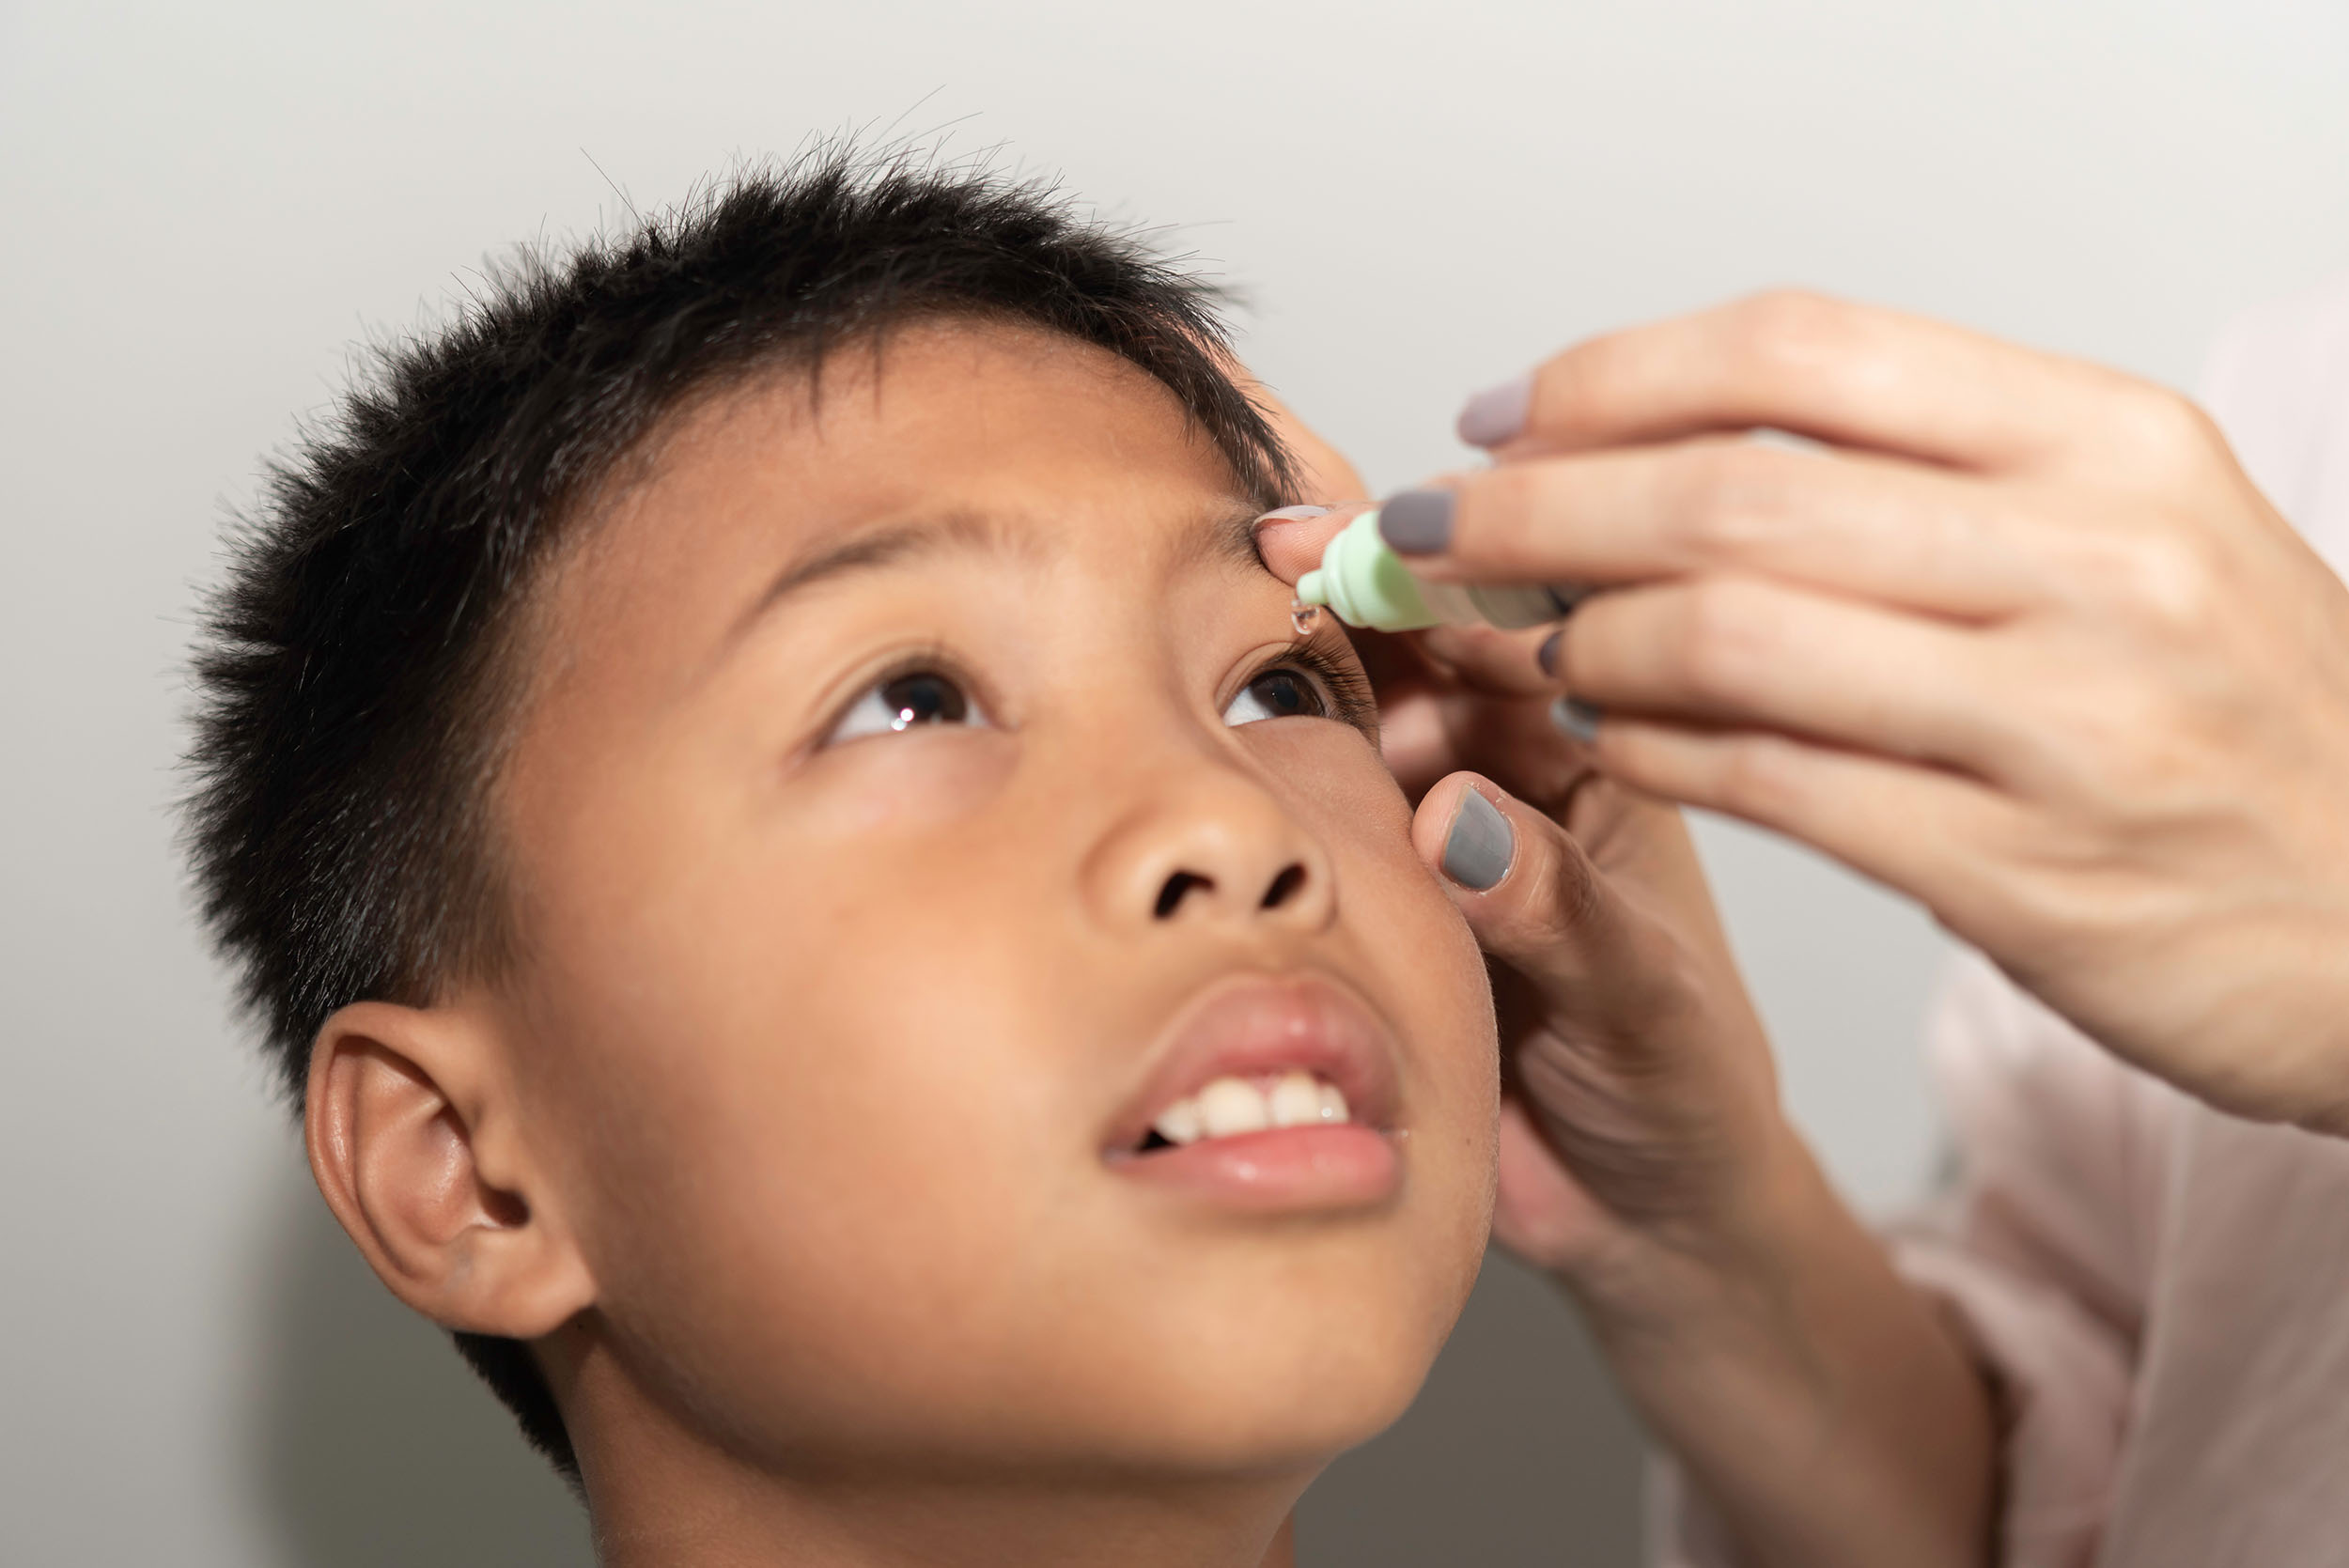 Applying eye drops to your own eyes or someone else’s eyes 